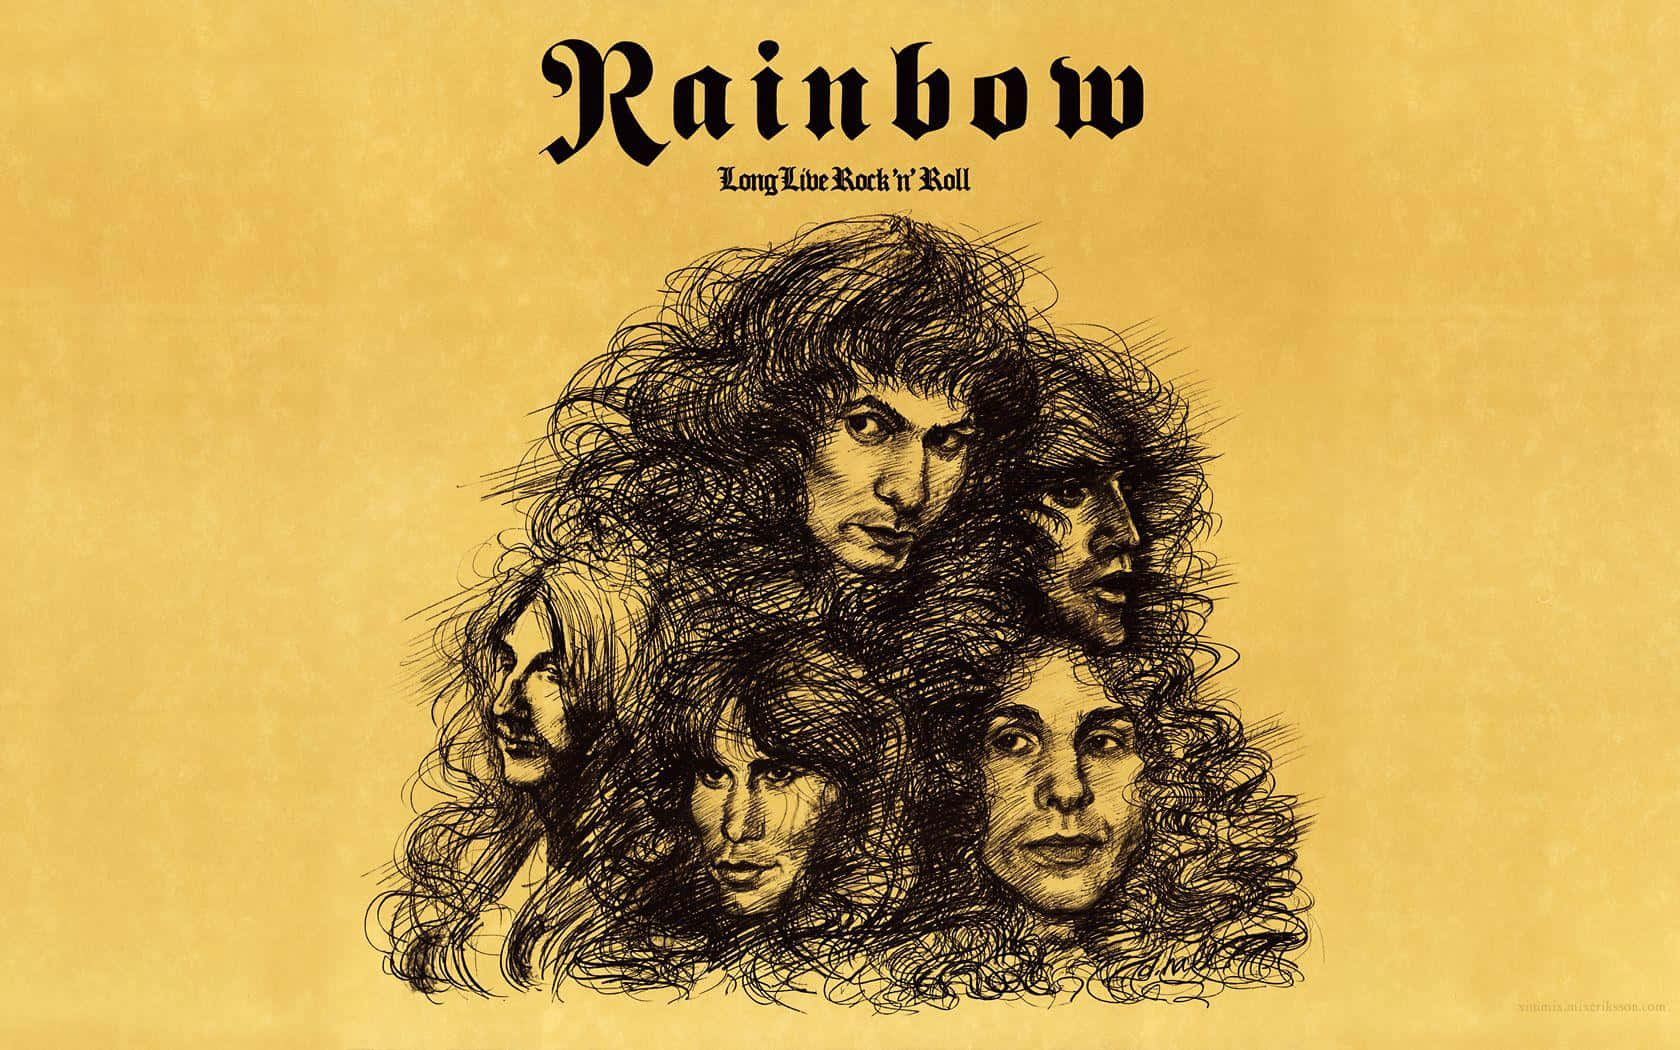 Rainbow - A Poster With The Band's Name On It